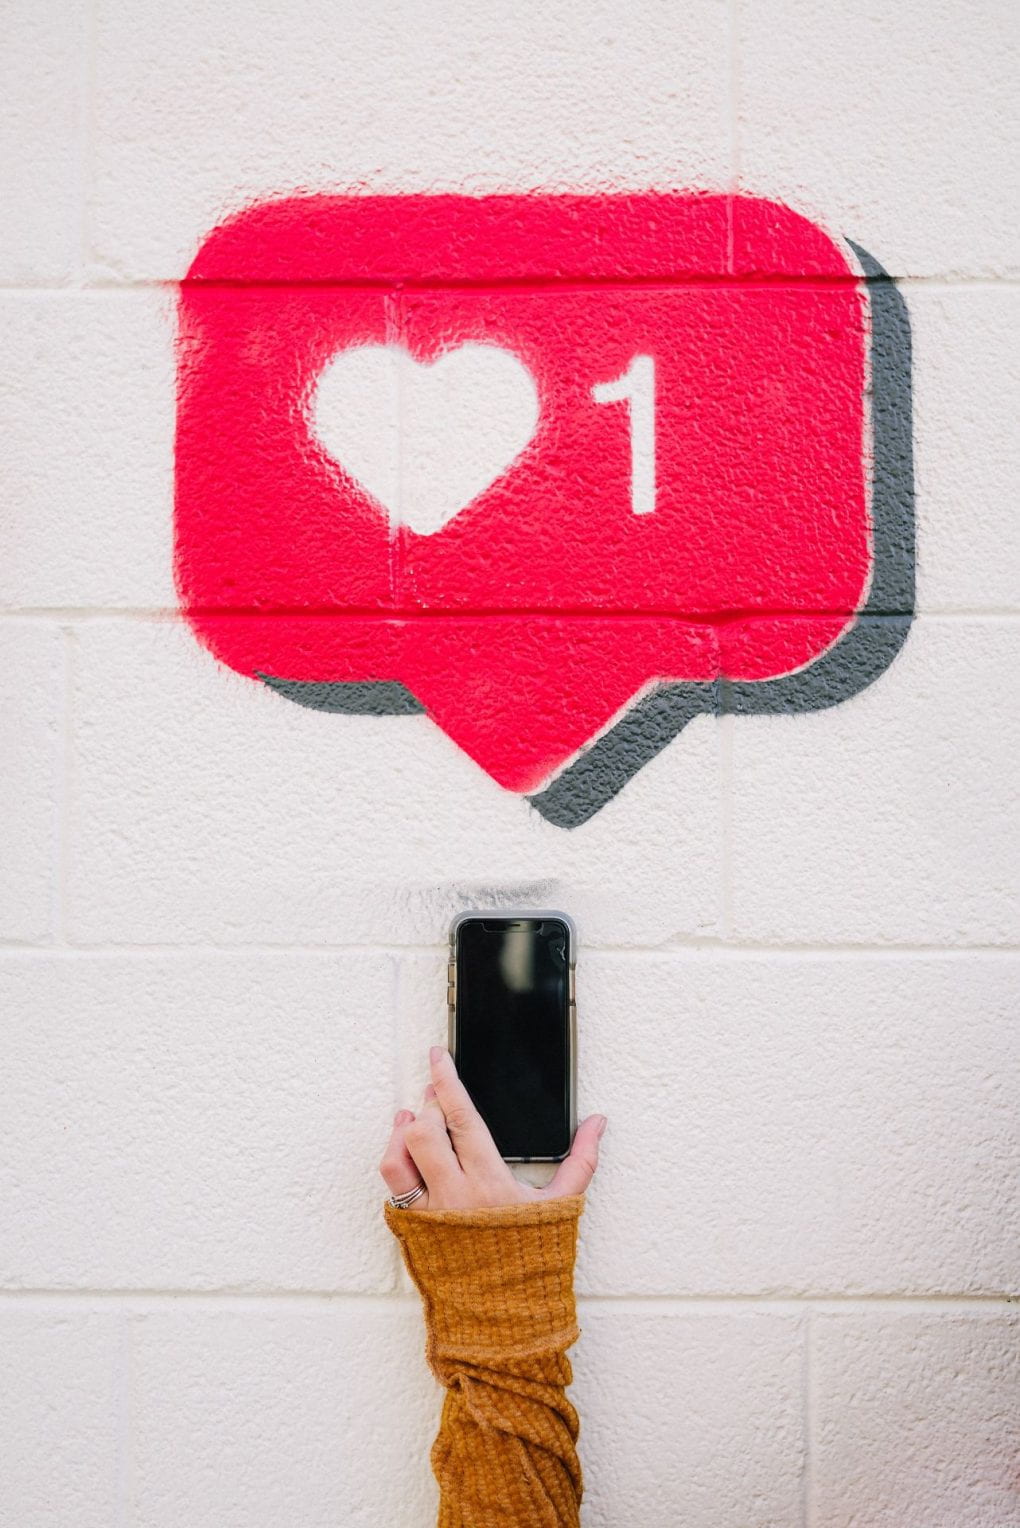 graffiti art of red and white social media love alert above smartphone being held by hand